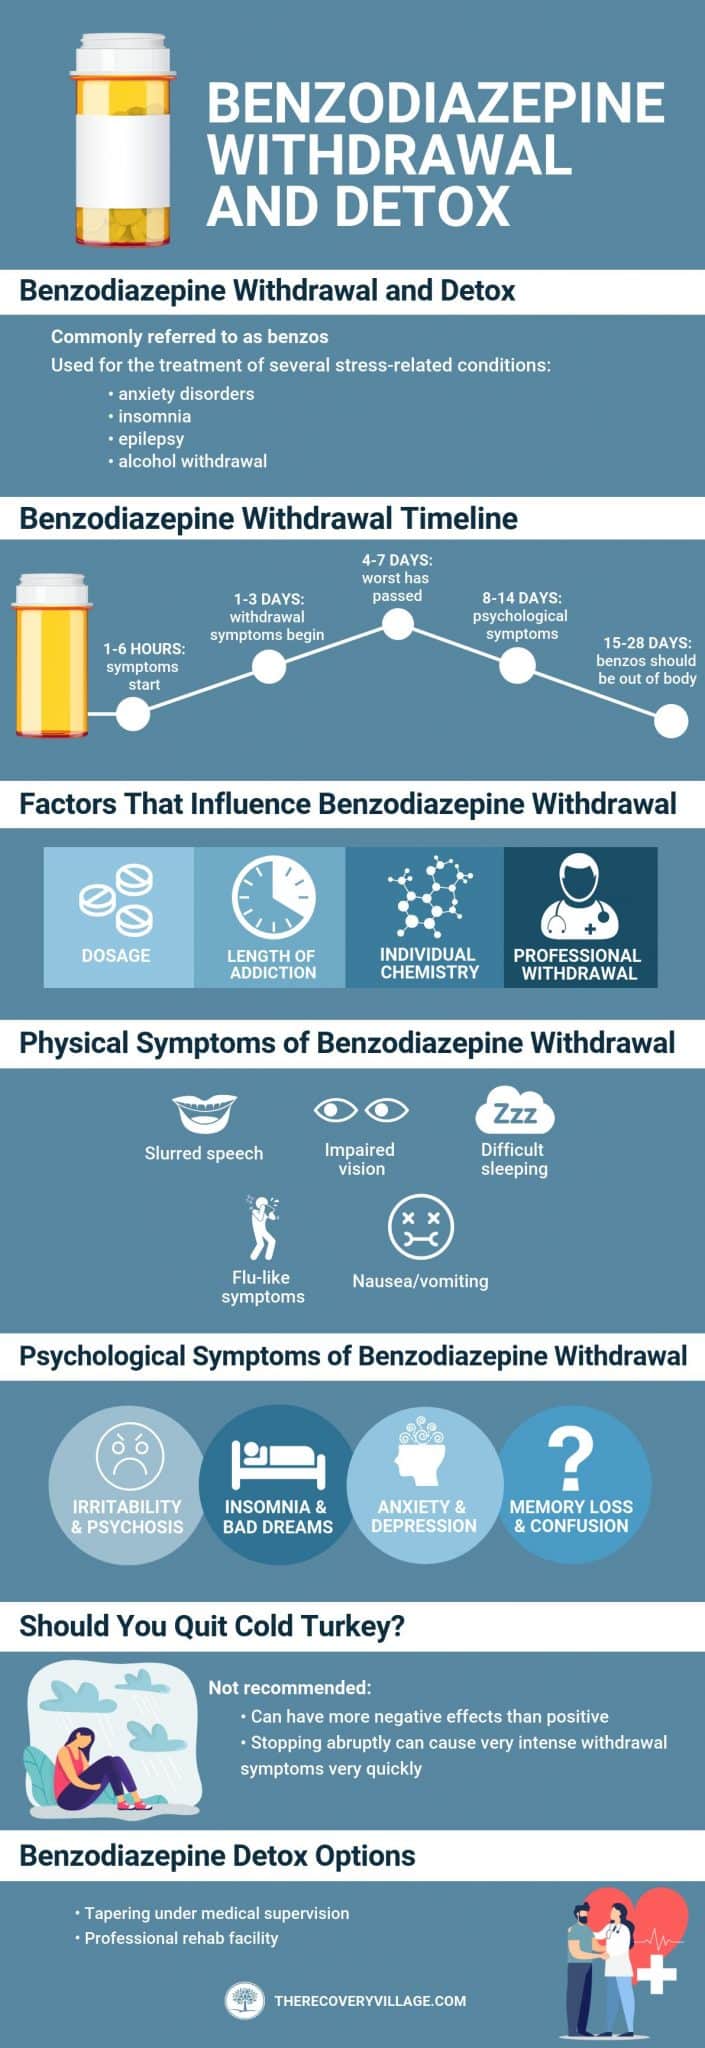 How to Detox From Benzodiazepines?